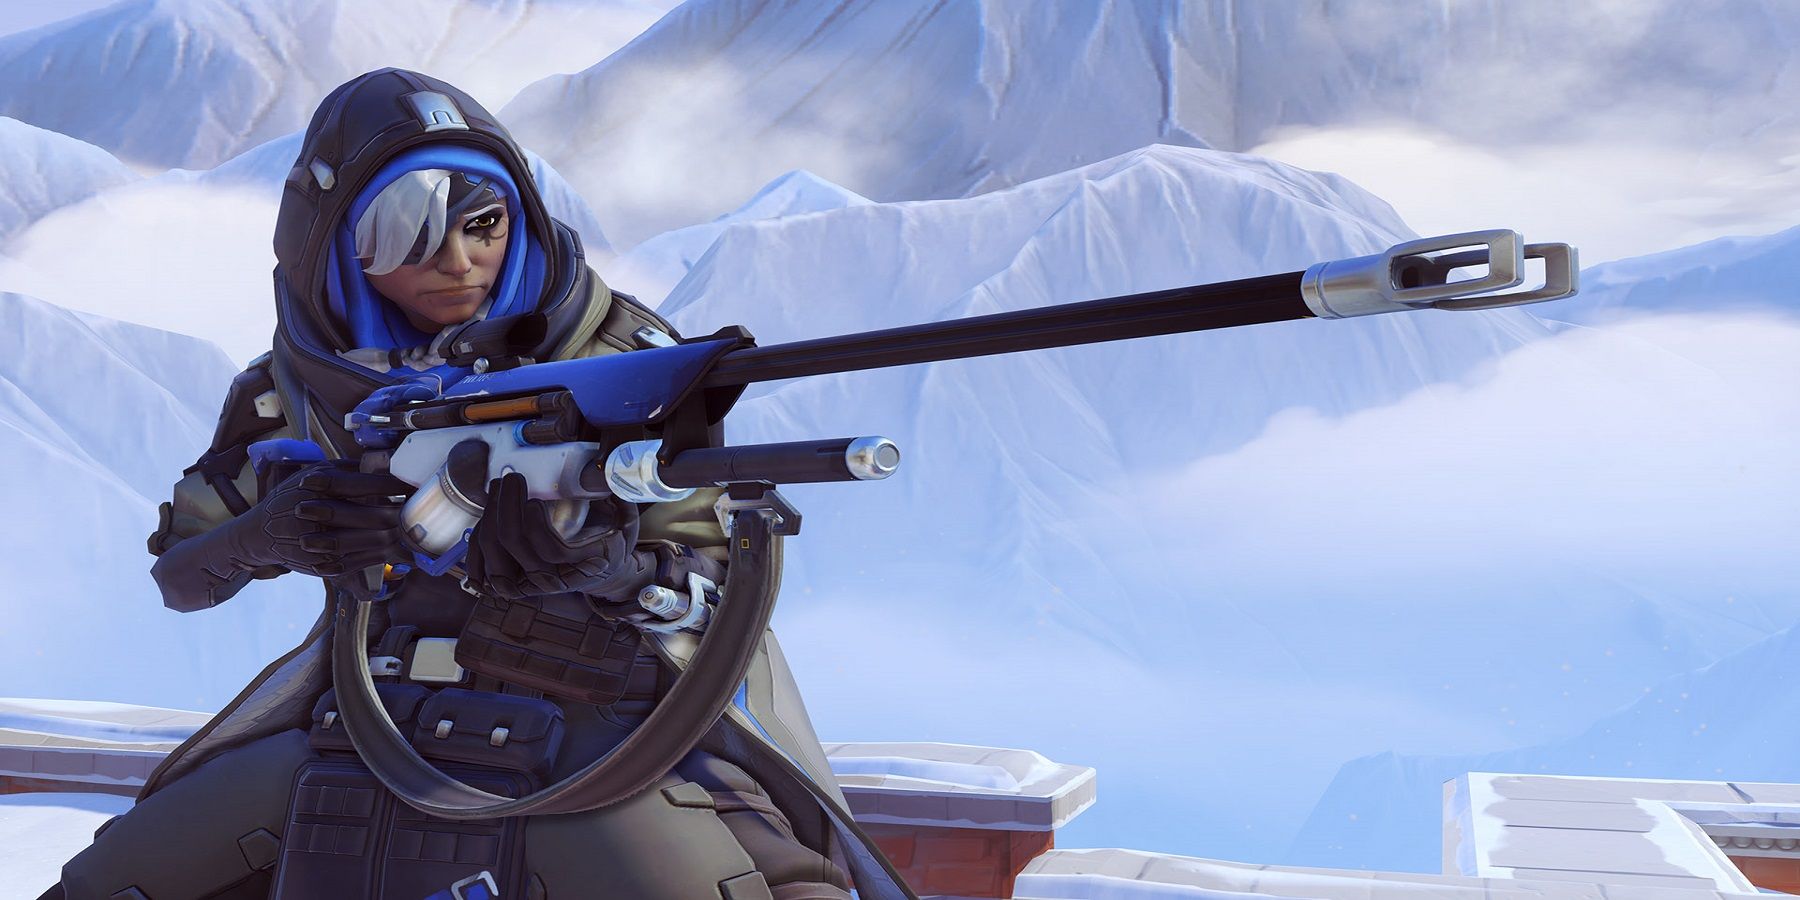 An Overwatch player uses Ana's sleeper dart to near perfection to drop an enemy Widowmaker into a minefield.